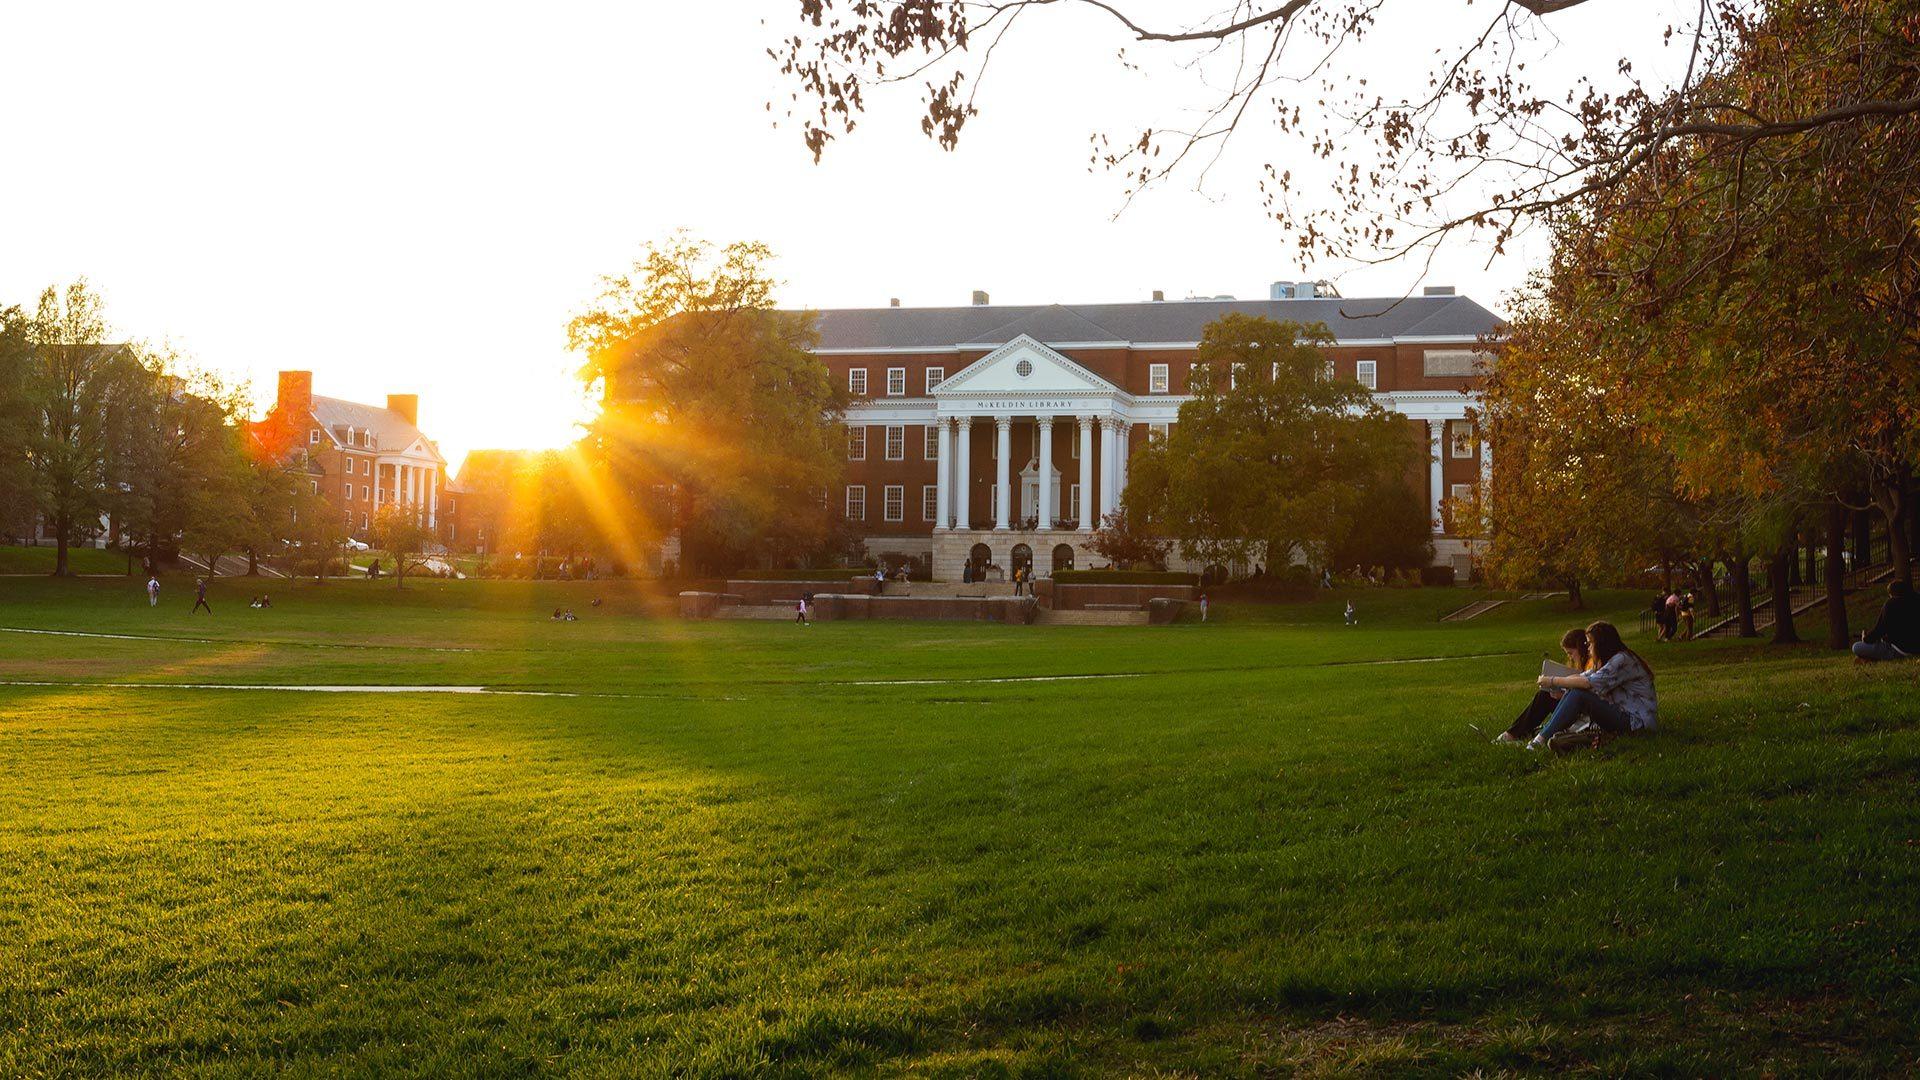 The sun sets next to McKeldin Library in the background while two students sit on the grass in the foreground